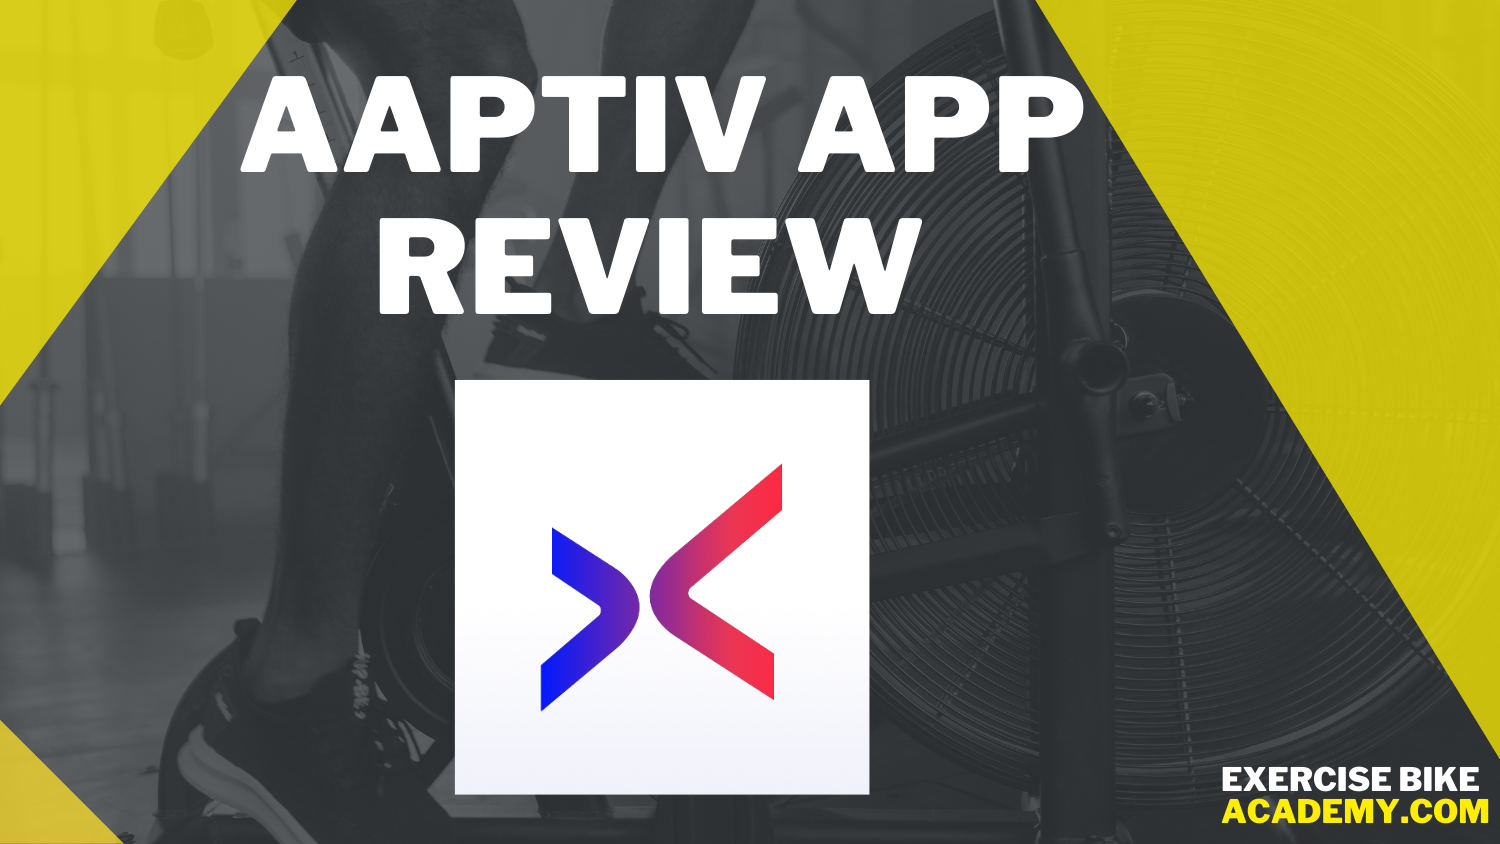 Aaptiv App Review: The Ultimate Guide to Getting in Shape with Aaptiv